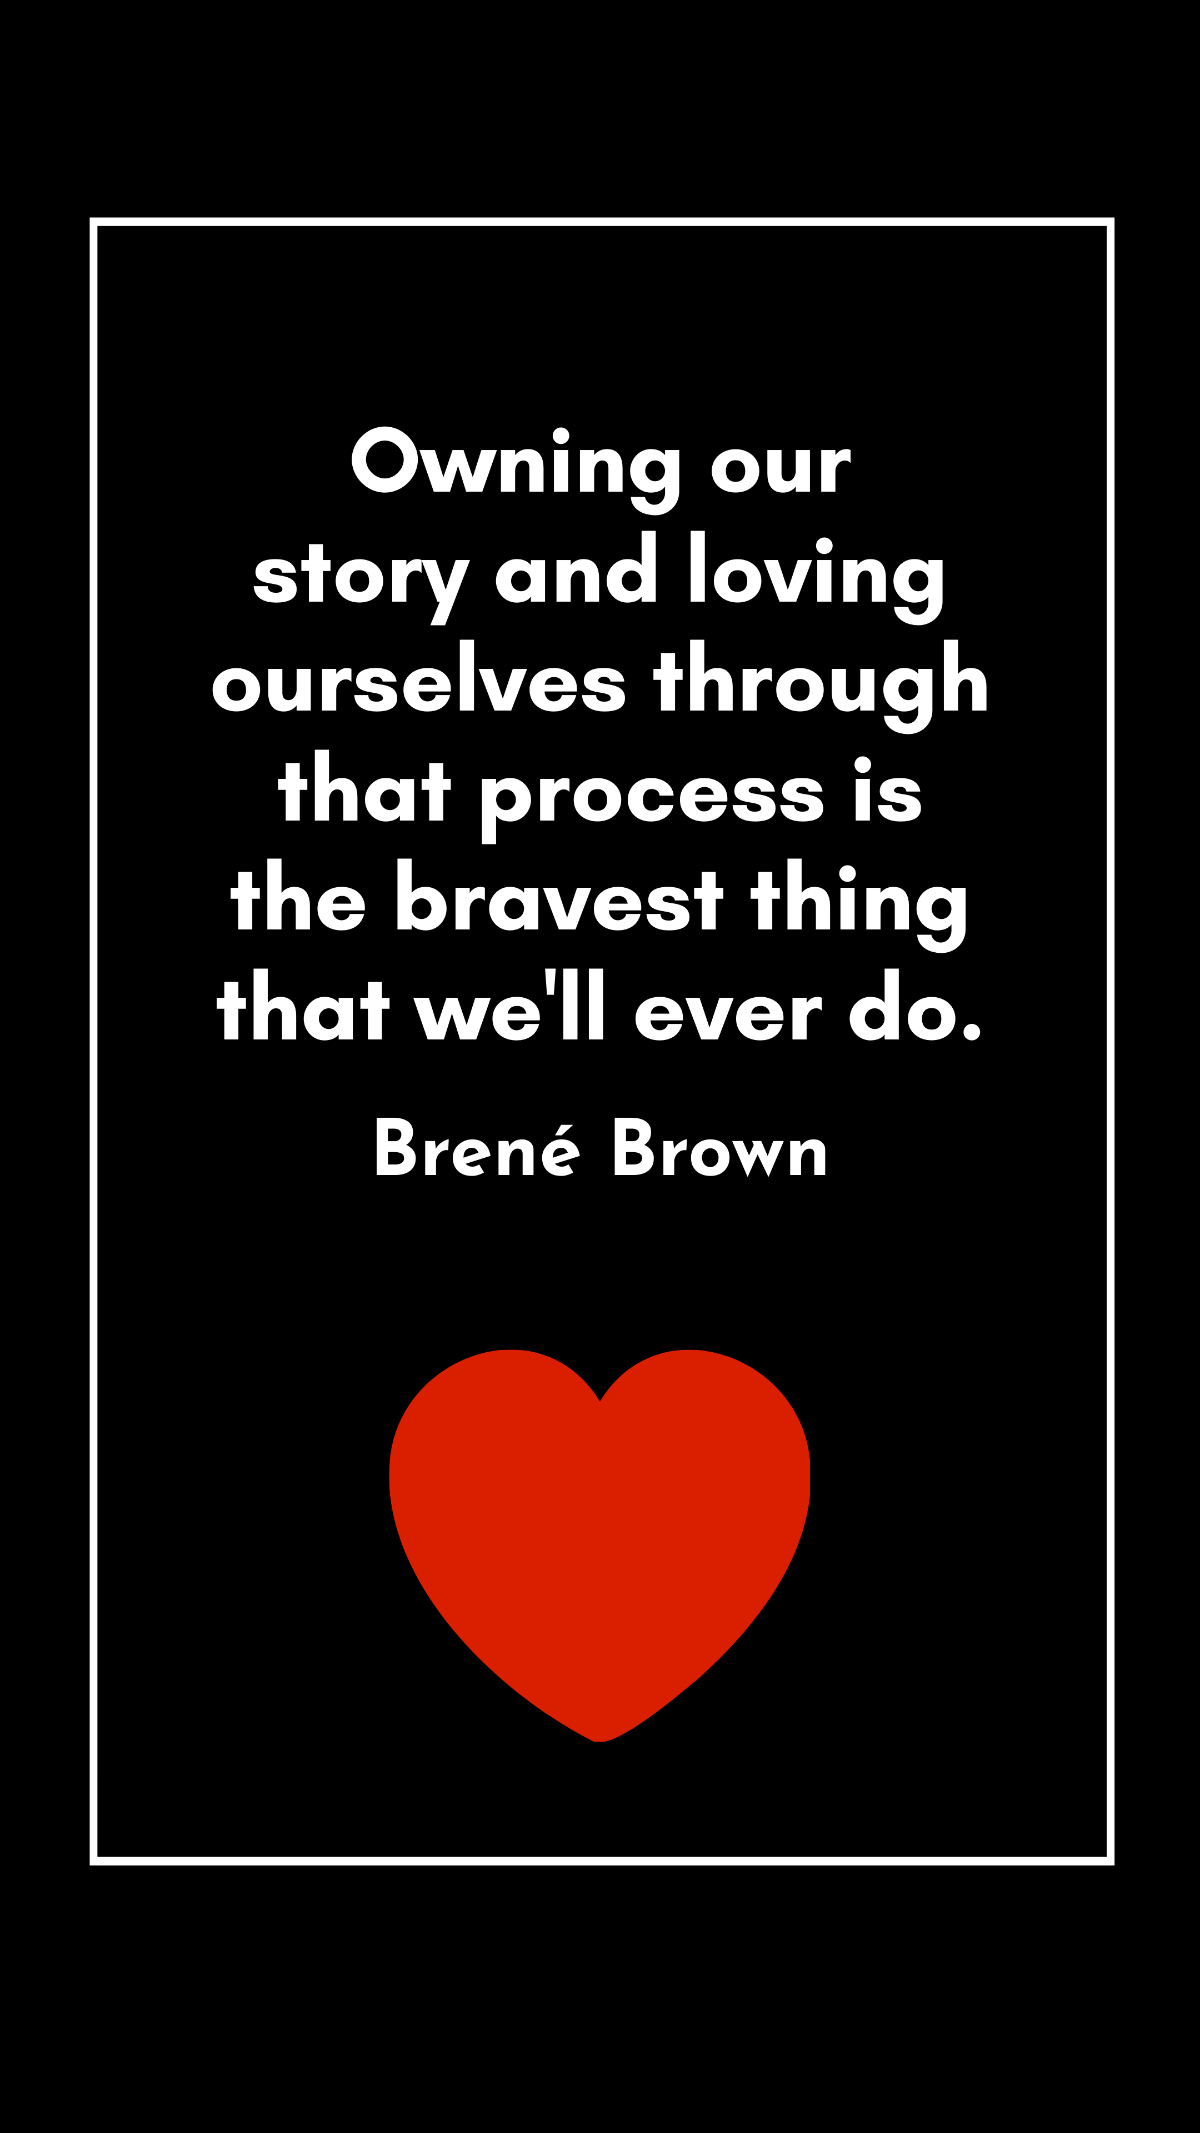 Brené Brown - Owning our story and loving ourselves through that process is the bravest thing that we'll ever do.